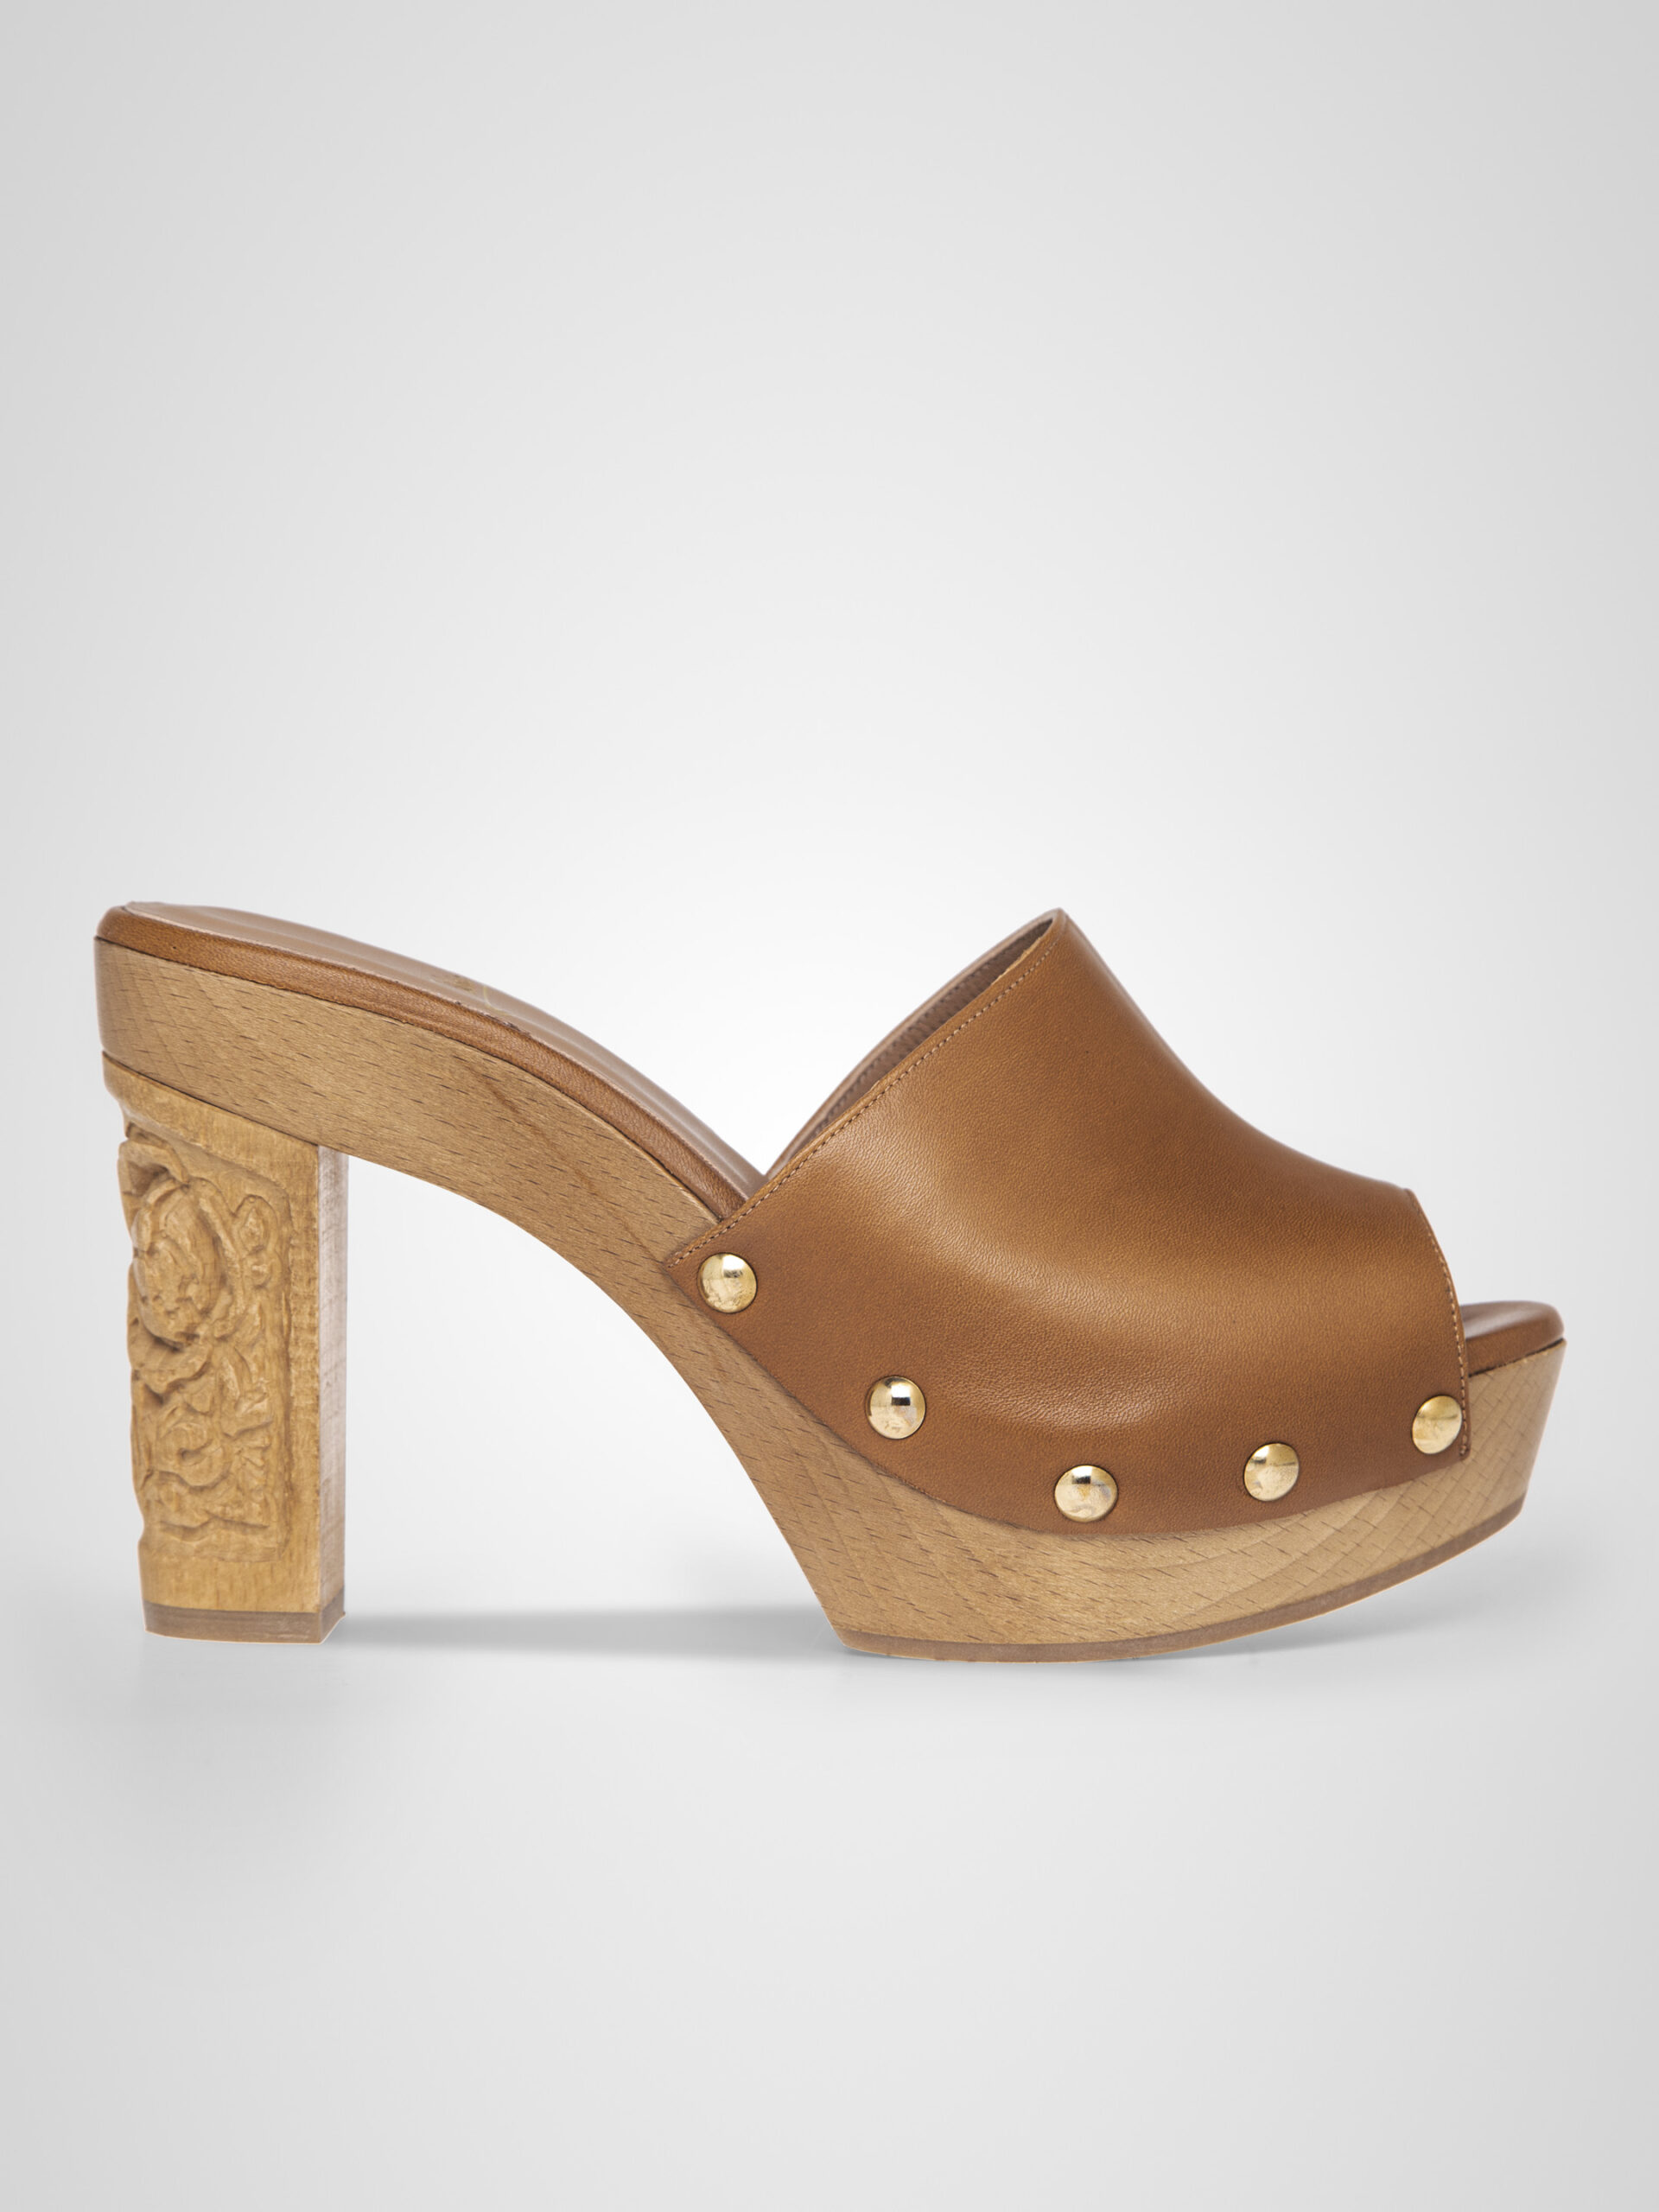 Paola Tan Mules - Balvic Shoes - Shoes for the woman of the XXI century